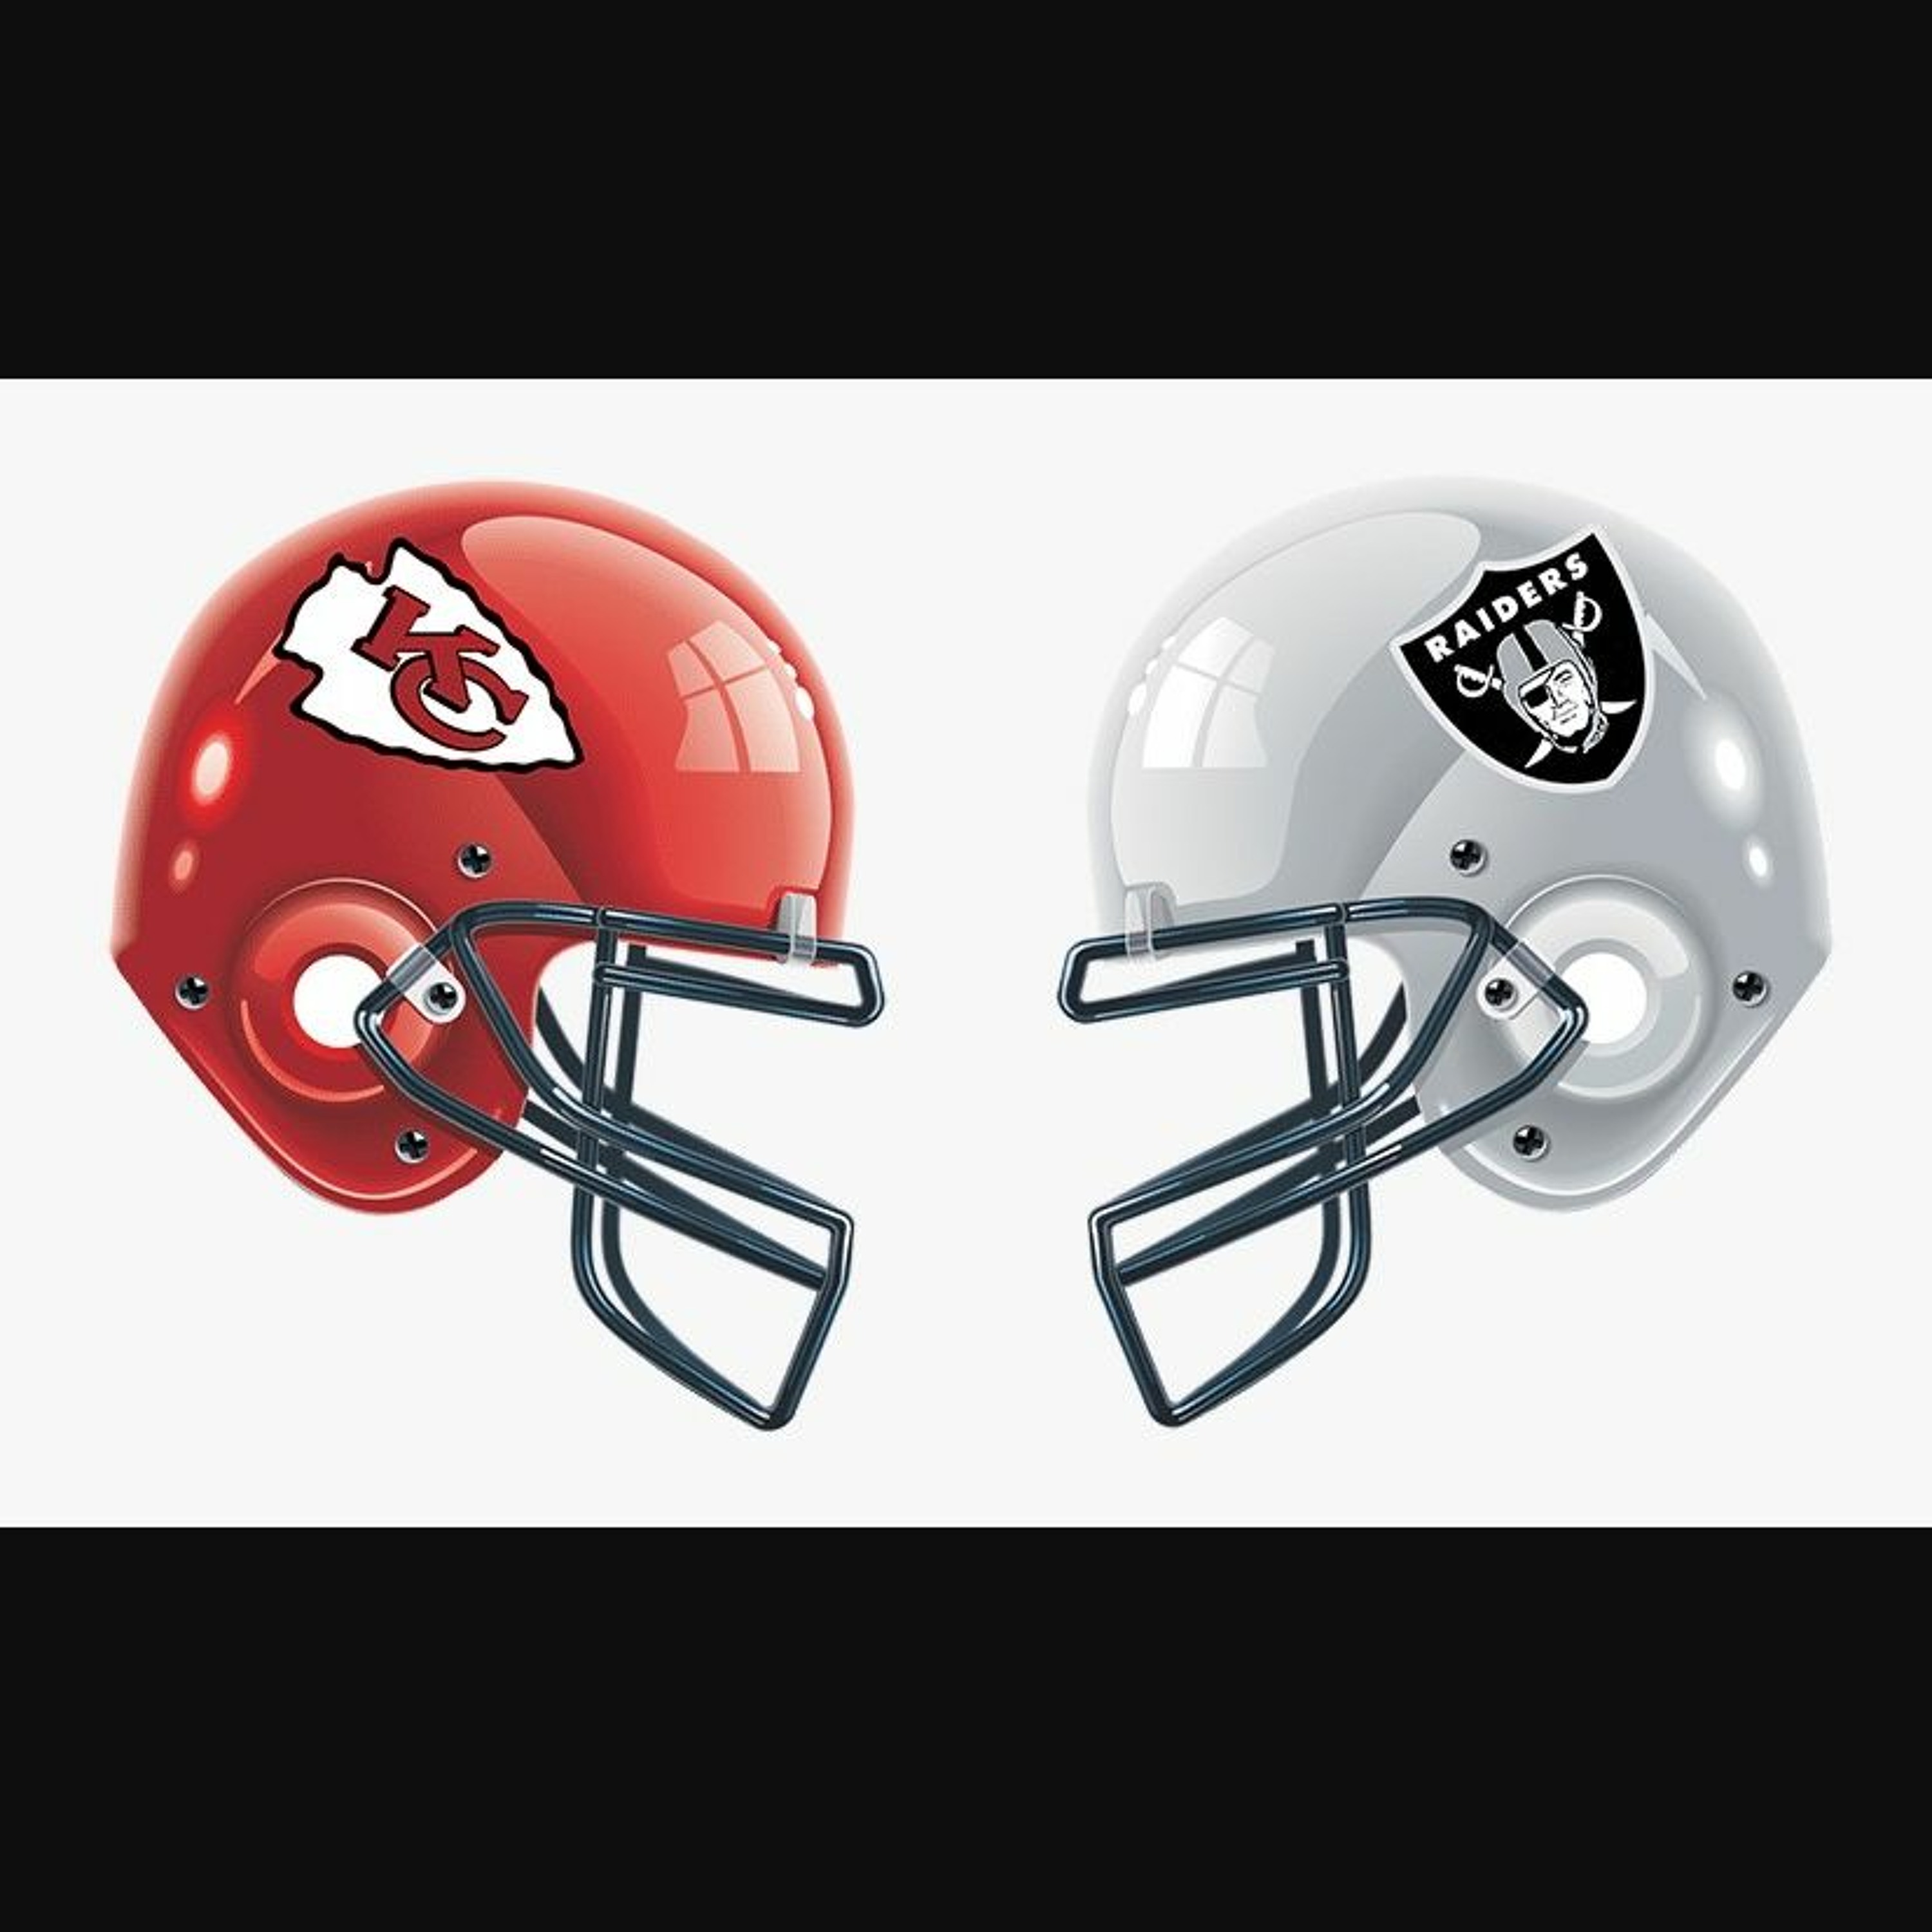 ”The Complete Raiders/Chiefs Rivalry Show”